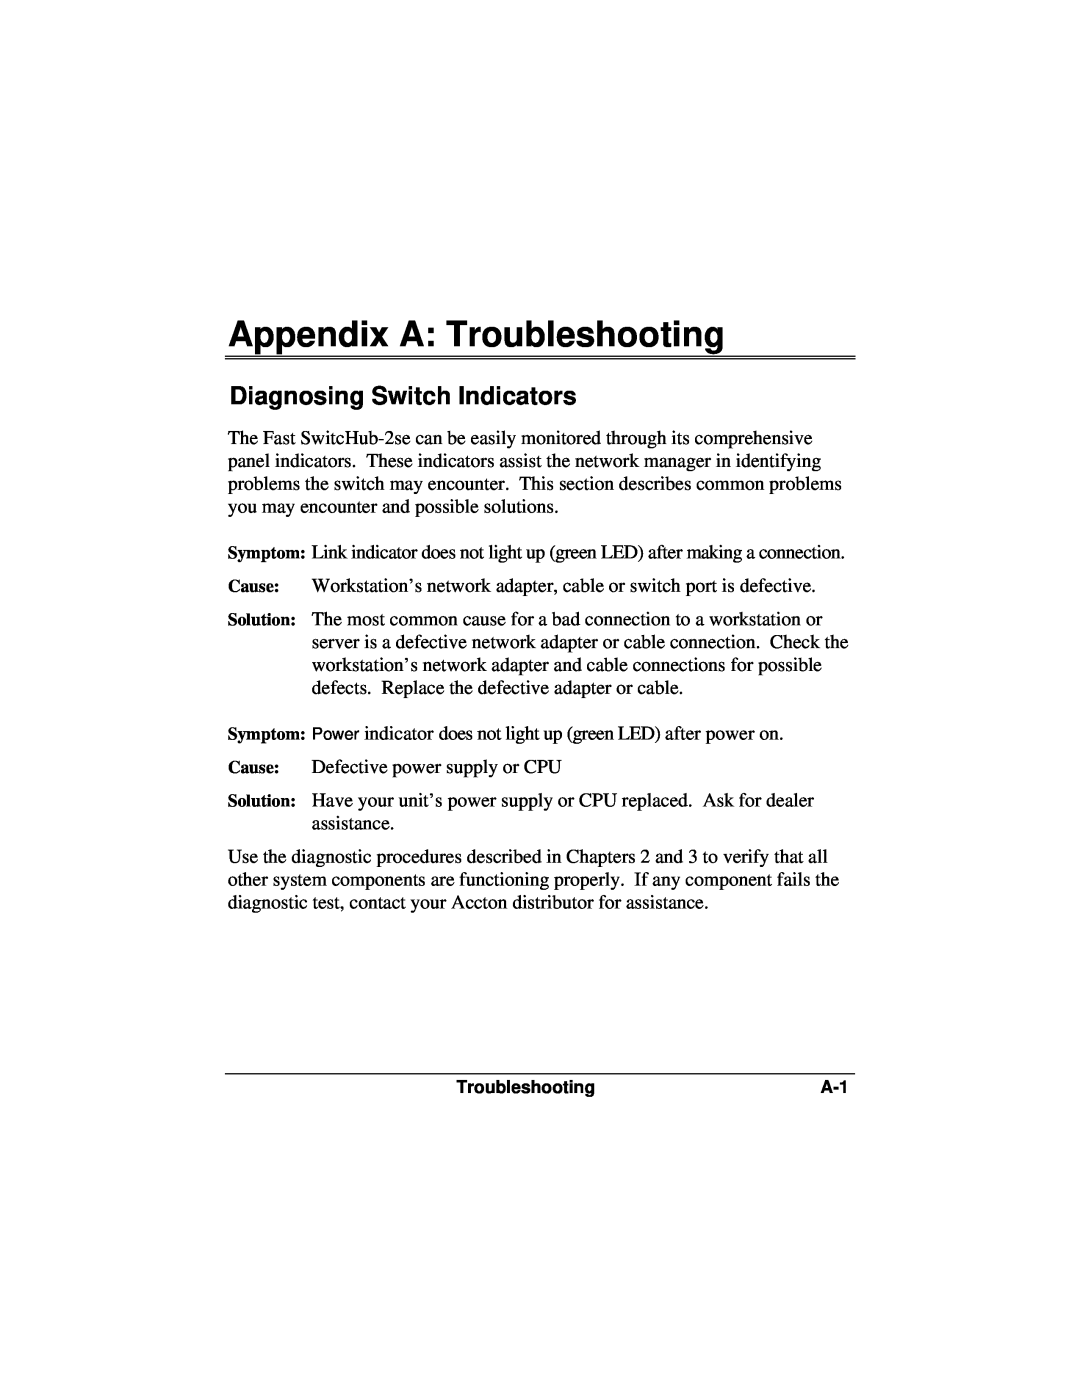 Accton Technology ES3002-TF manual Appendix A Troubleshooting, Diagnosing Switch Indicators 